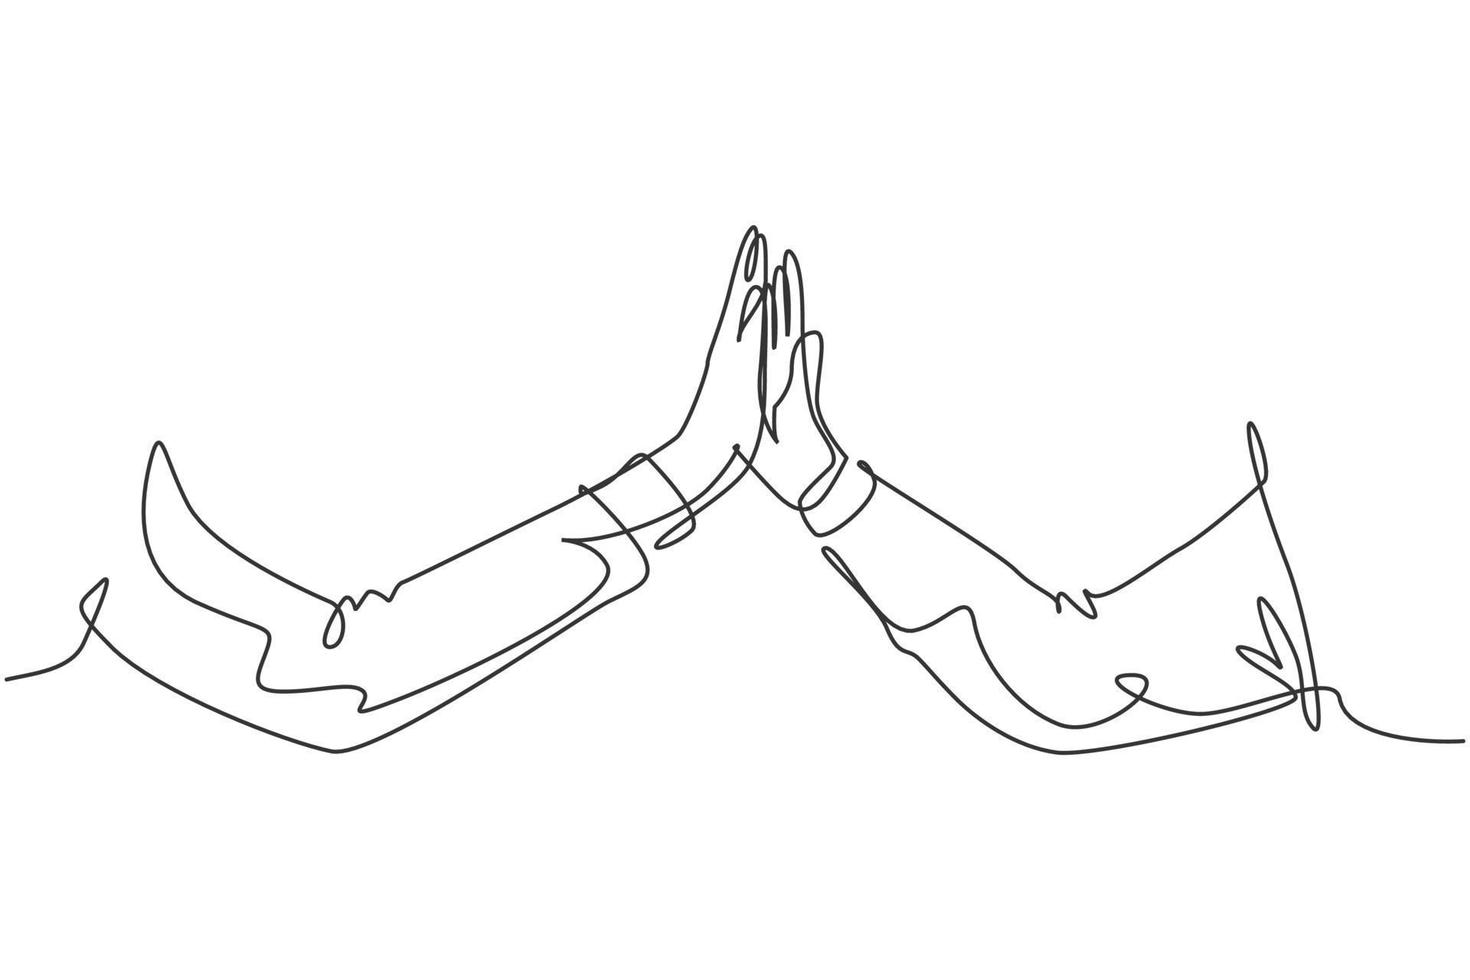 One line drawing of two men giving high fives gesture hands wearing office clothes to celebrate success. Business teamwork concept. Trendy continuous line draw graphic design illustration vector